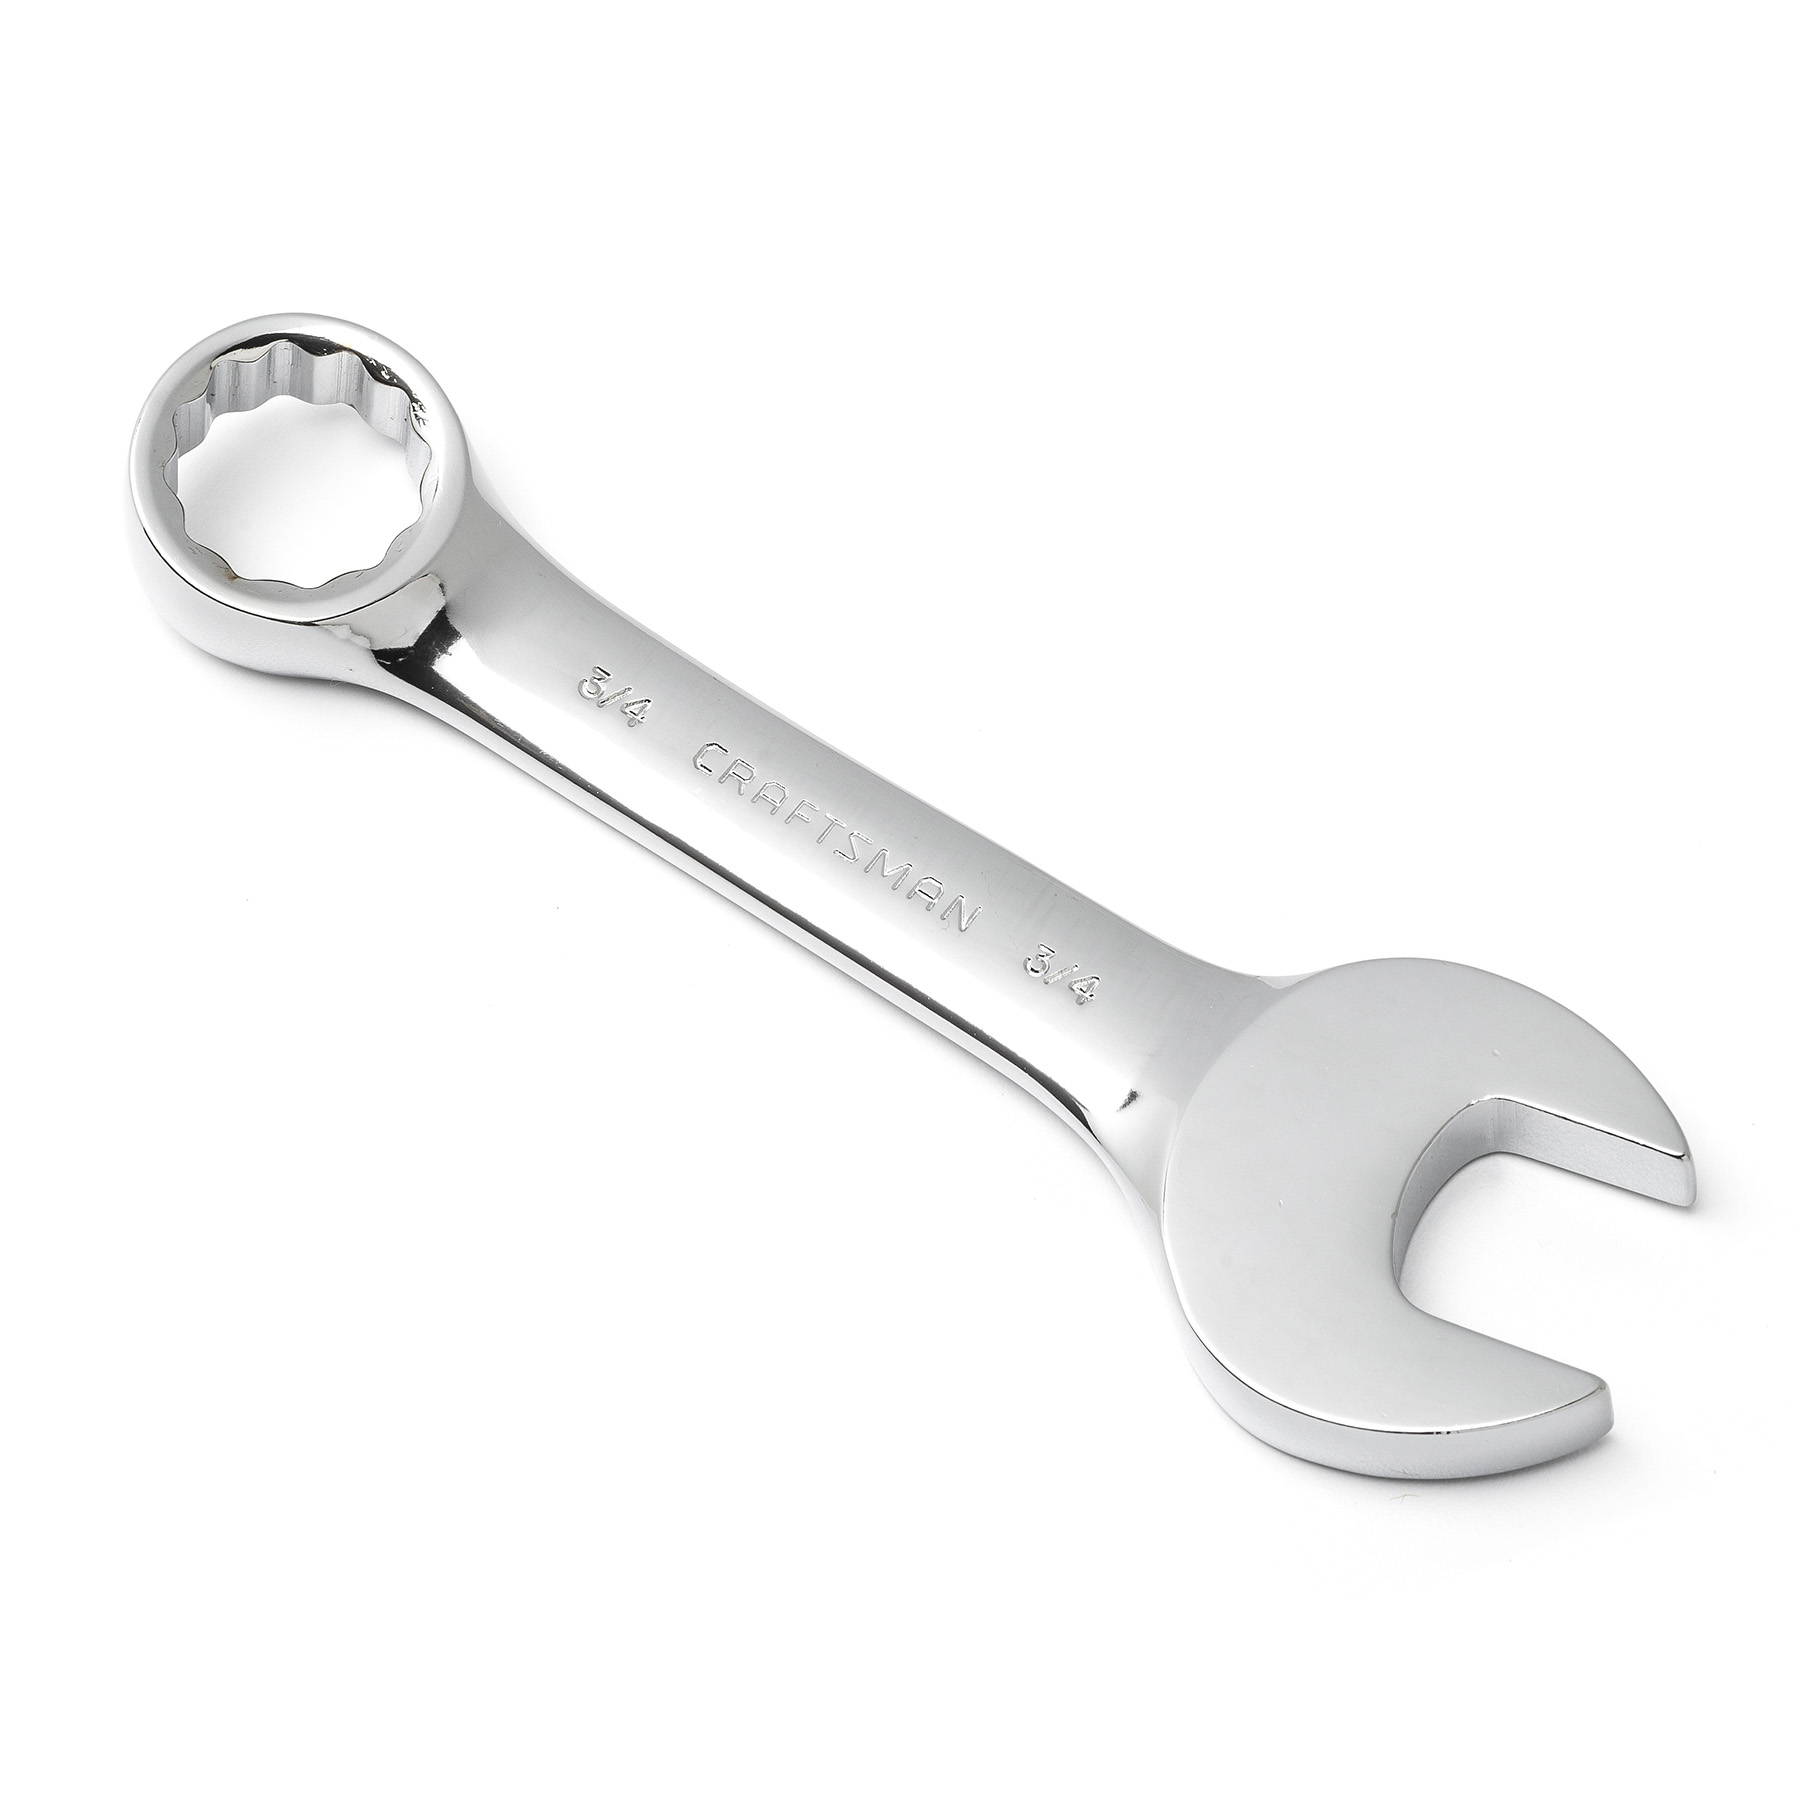 Craftsman 3/4 in. Full Polish Stubby Wrench, 12 pt. Combination